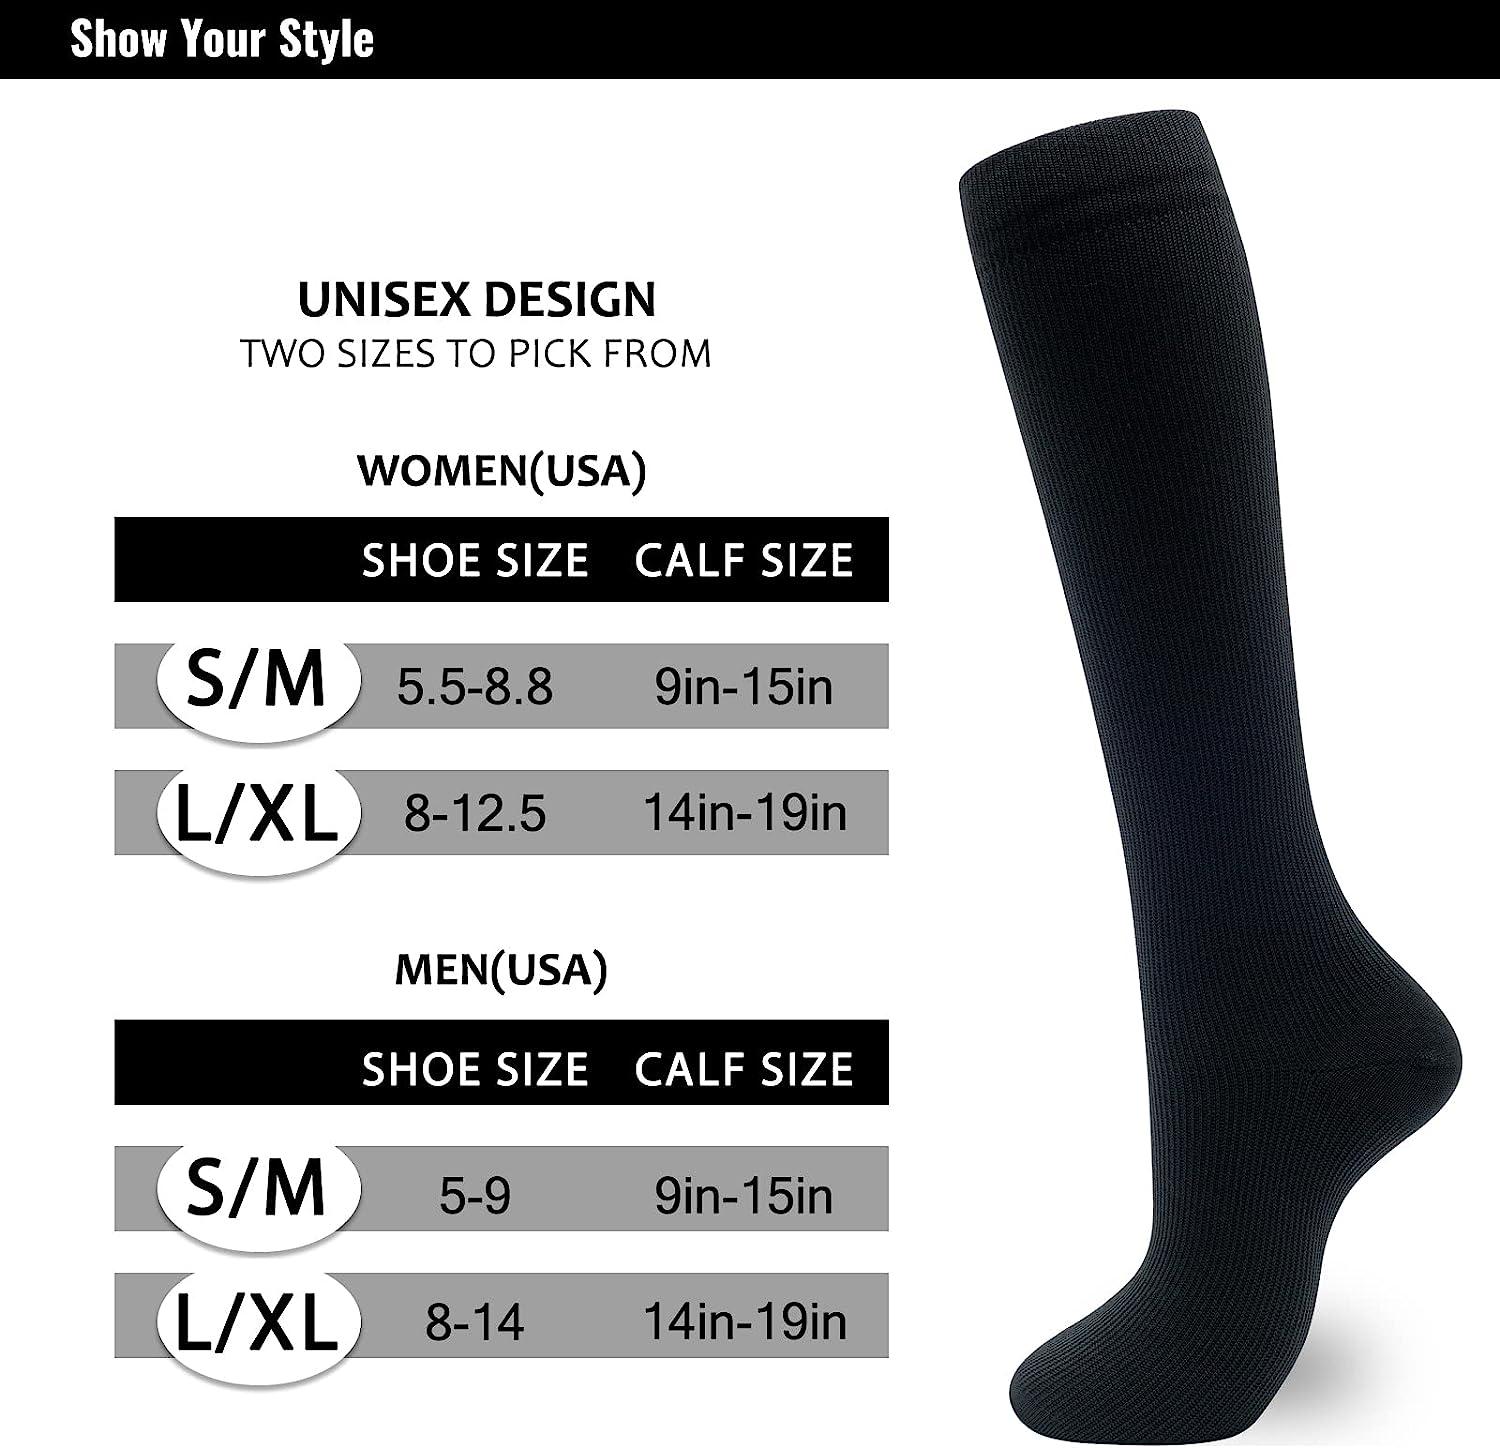 Stylish and Supportive Compression Socks